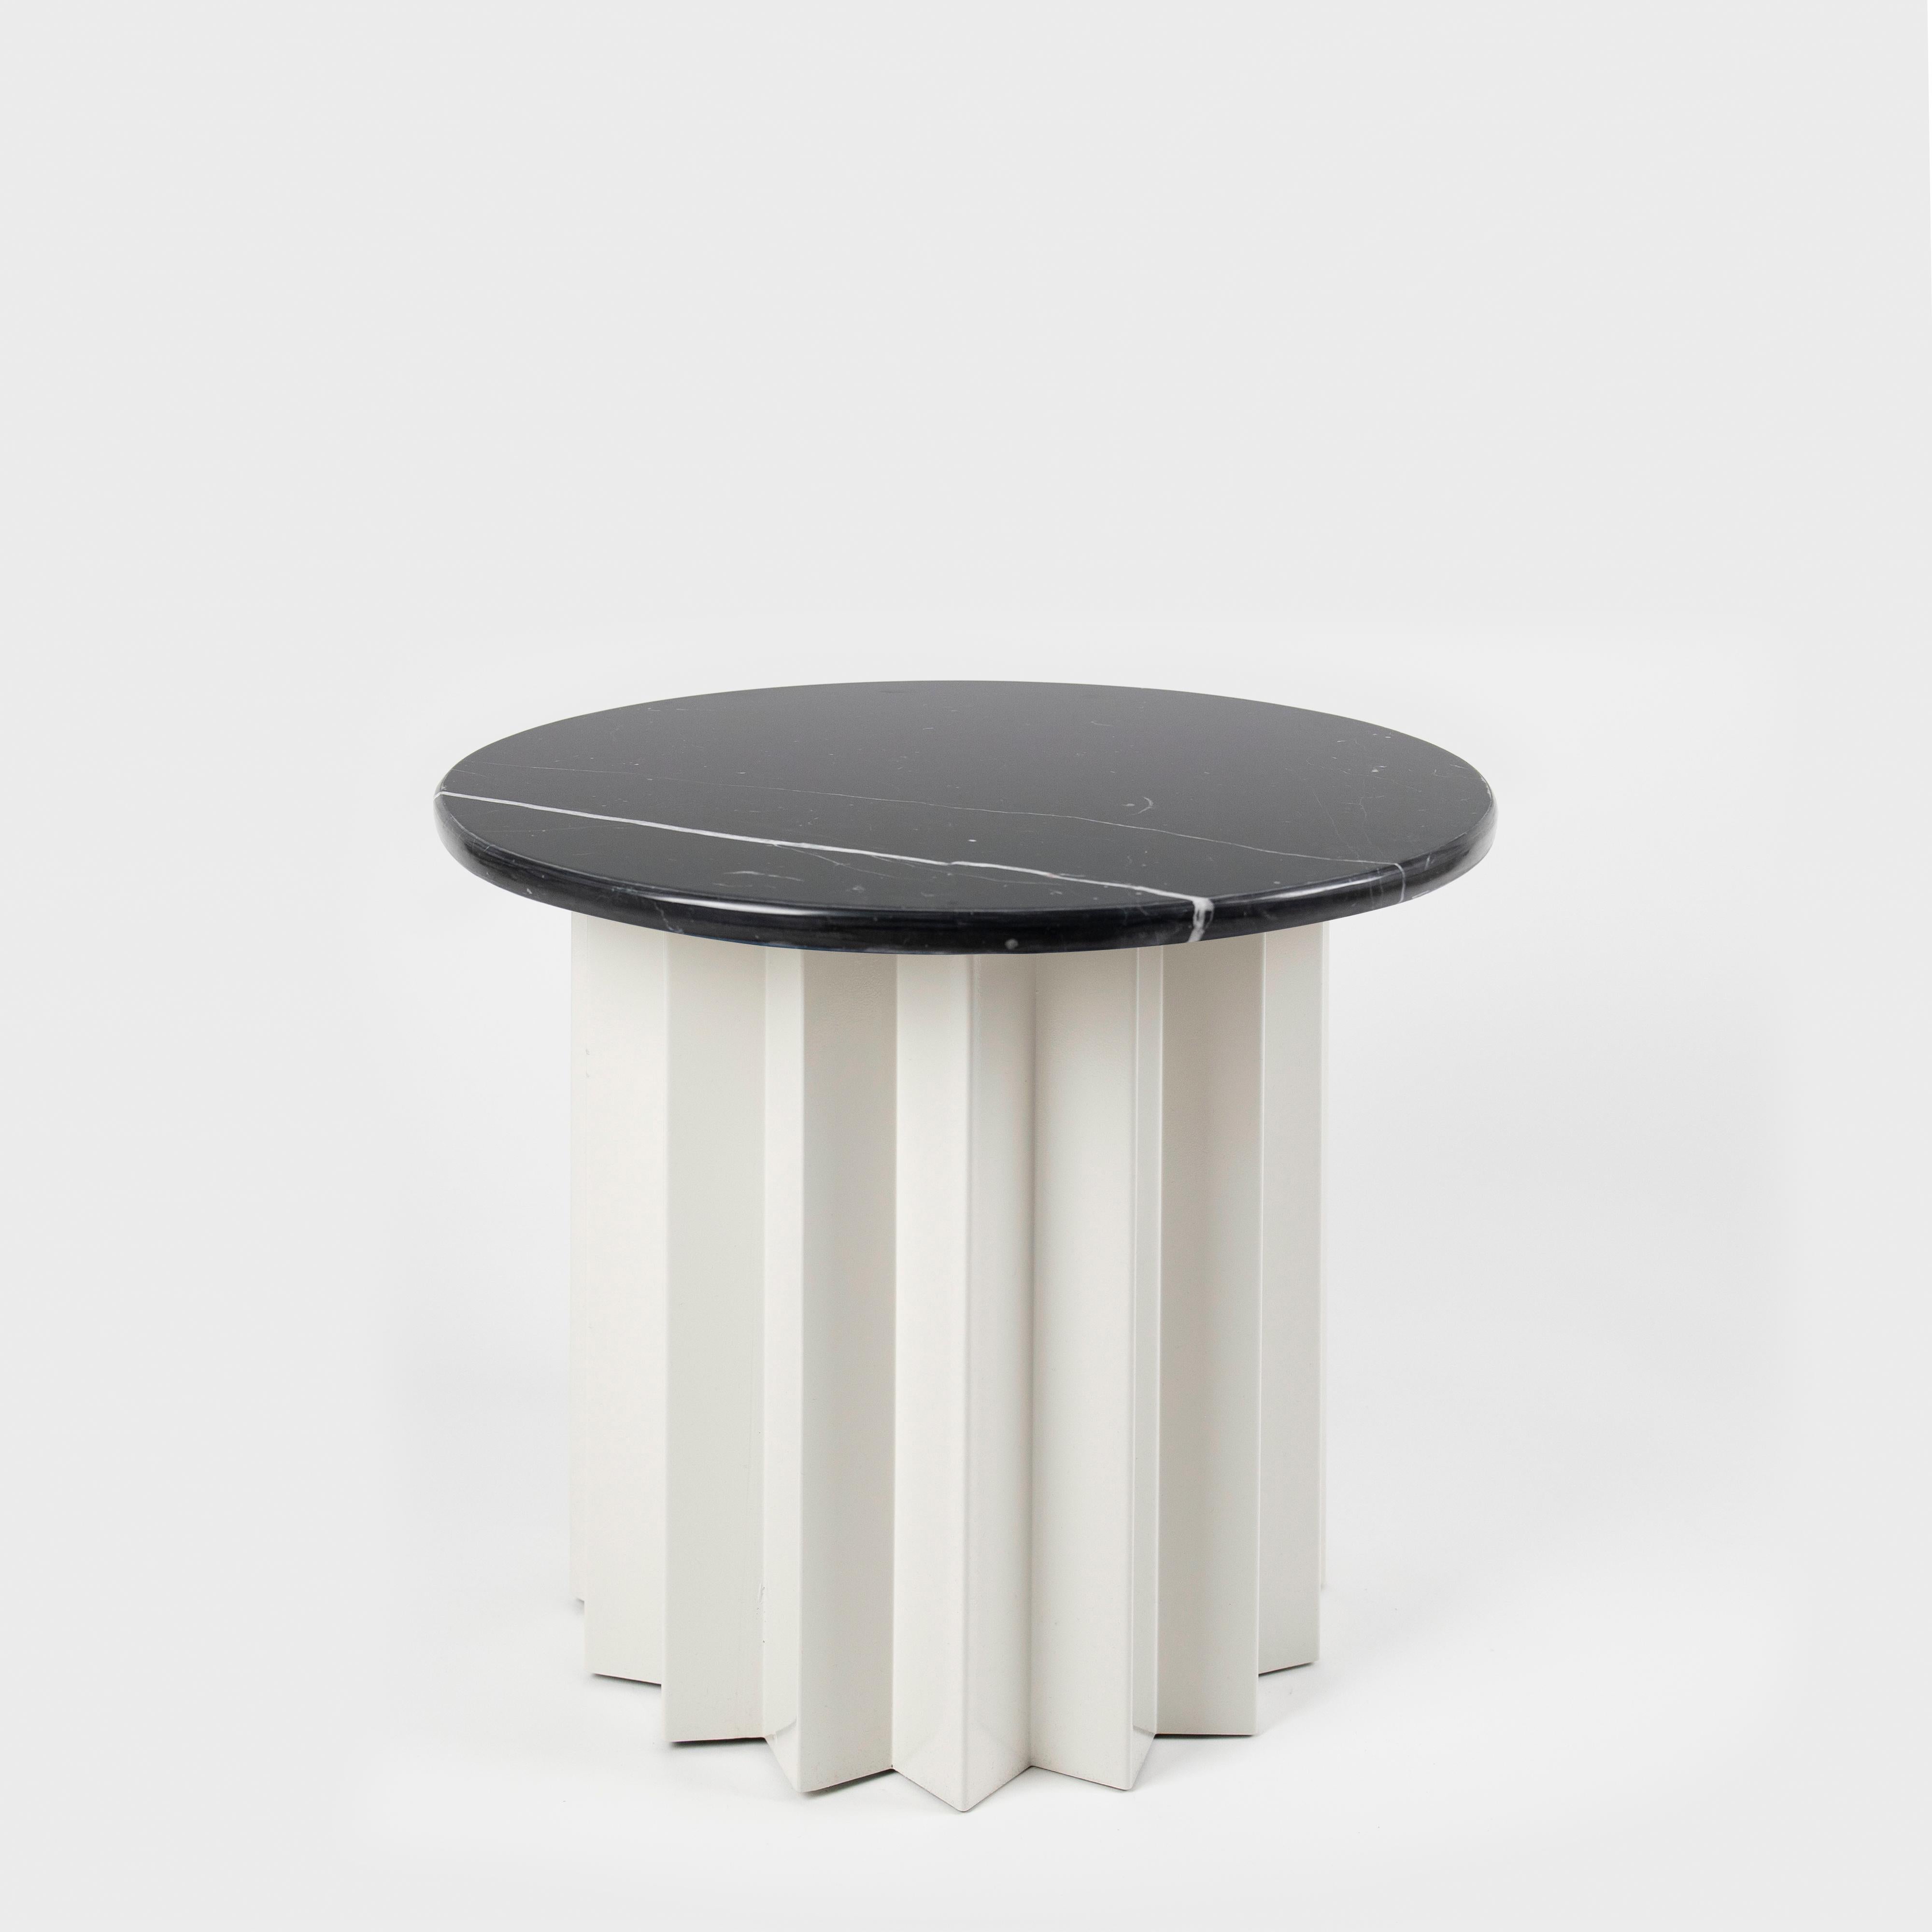 Volume is a collection of dining and side tables designed by DAY Studio in their unique simple and playful language. The powder coated metal base is completed with a table top selected from a distinguished choice of material and finish options.

An